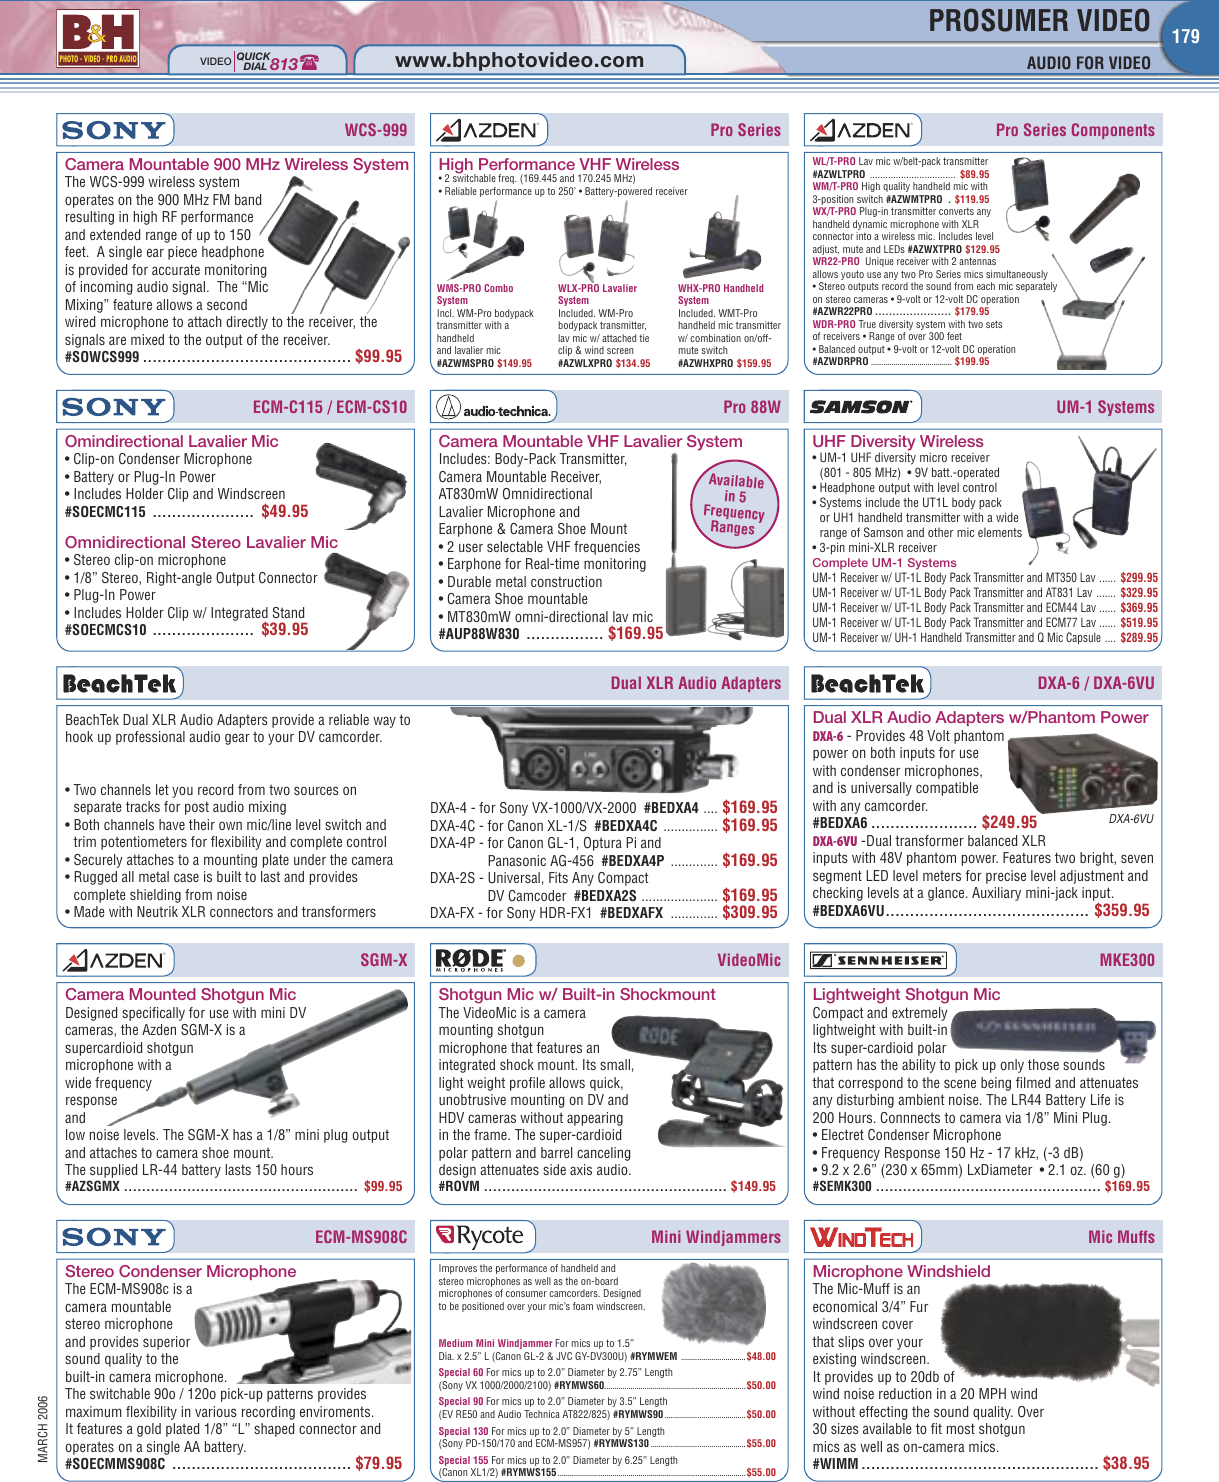 Page 8 of 12 - Canon Canon-Elura-100-Users-Manual- 172-183 ProsumerVideo 03-06  Canon-elura-100-users-manual